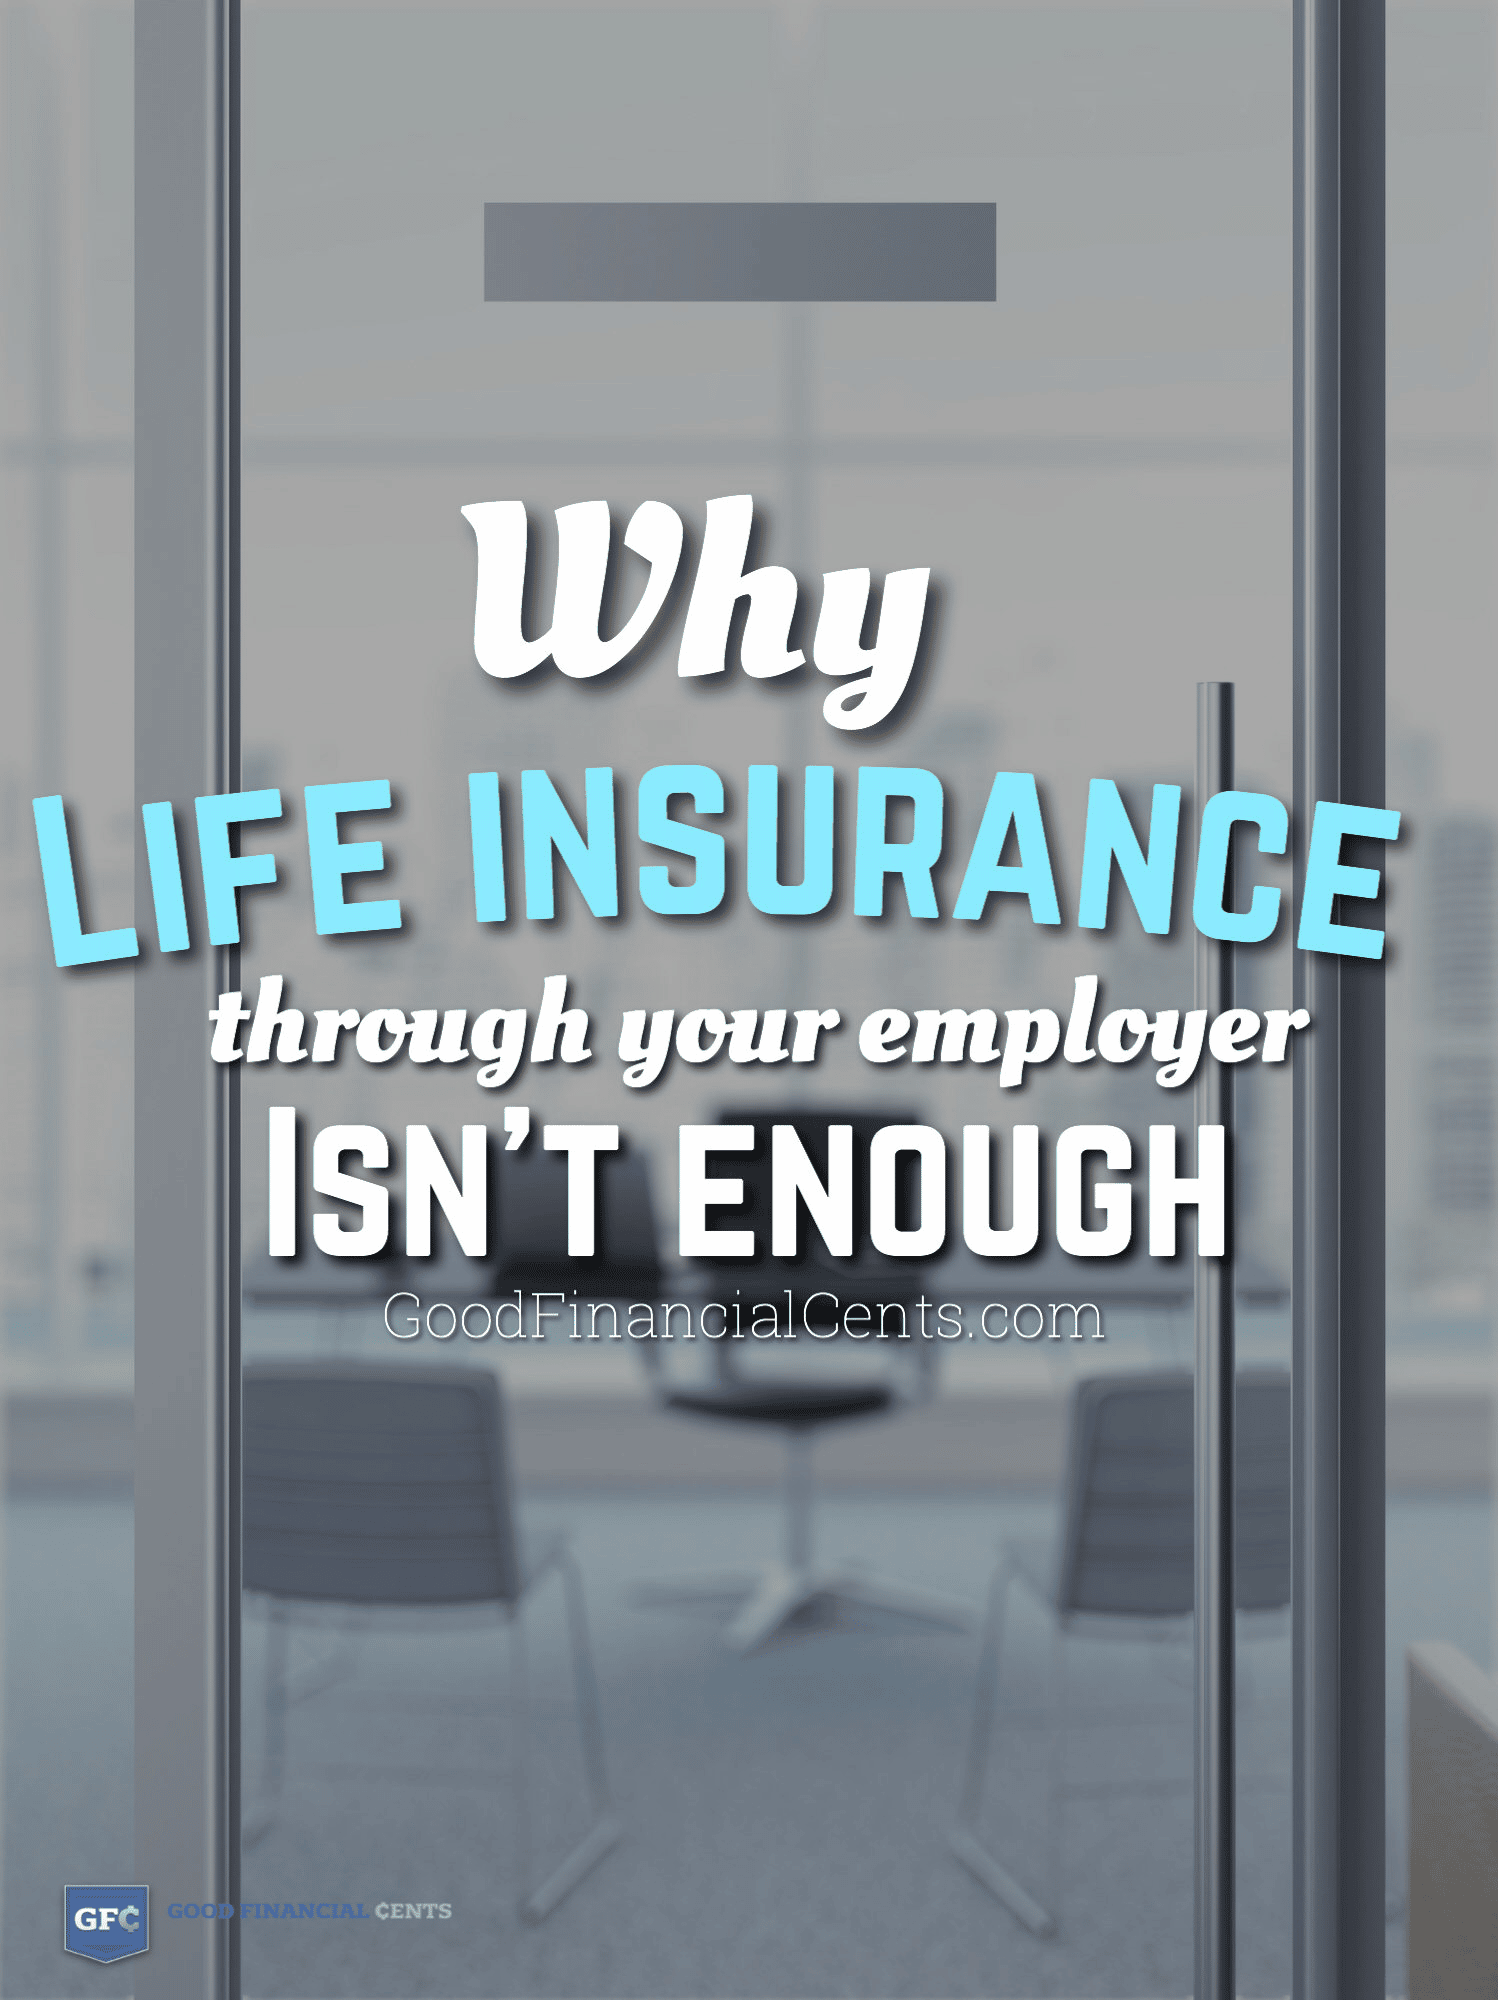 Is It Enough to Have Life Insurance Through Work? - Good Financial Cents